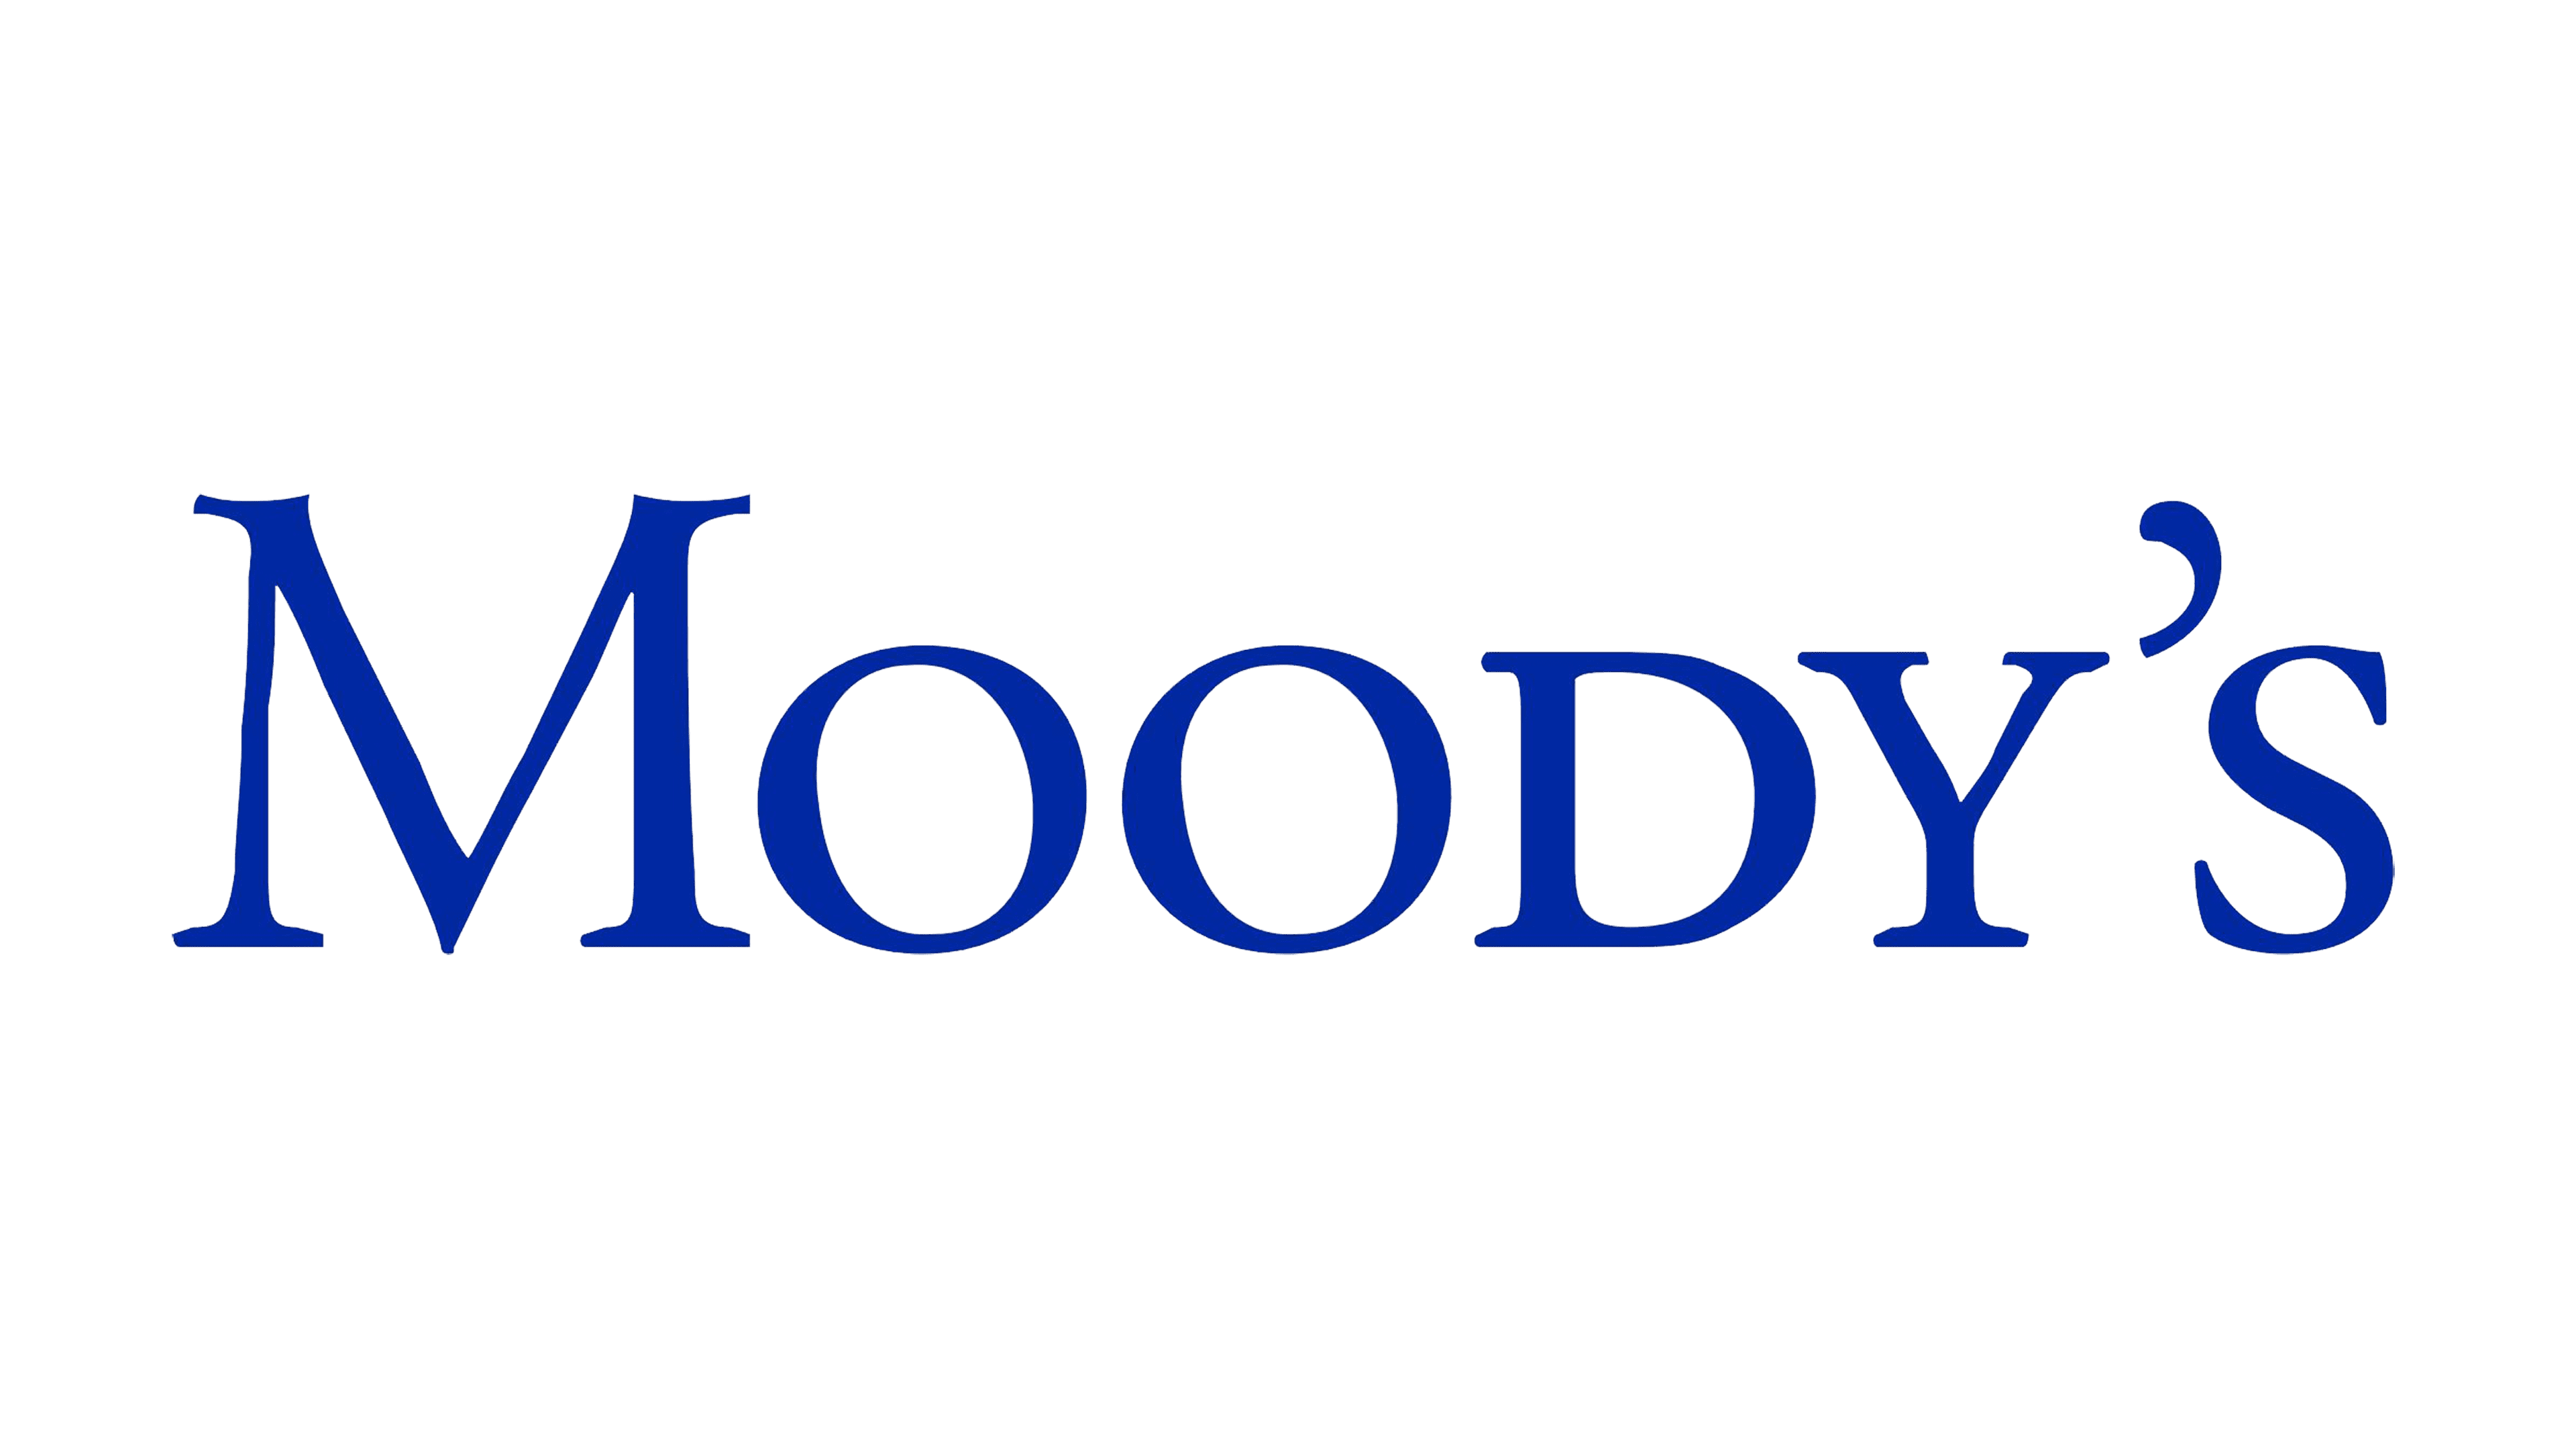 Asia Pacific region’s economic growth to stay robust despite global risks – Moody’s